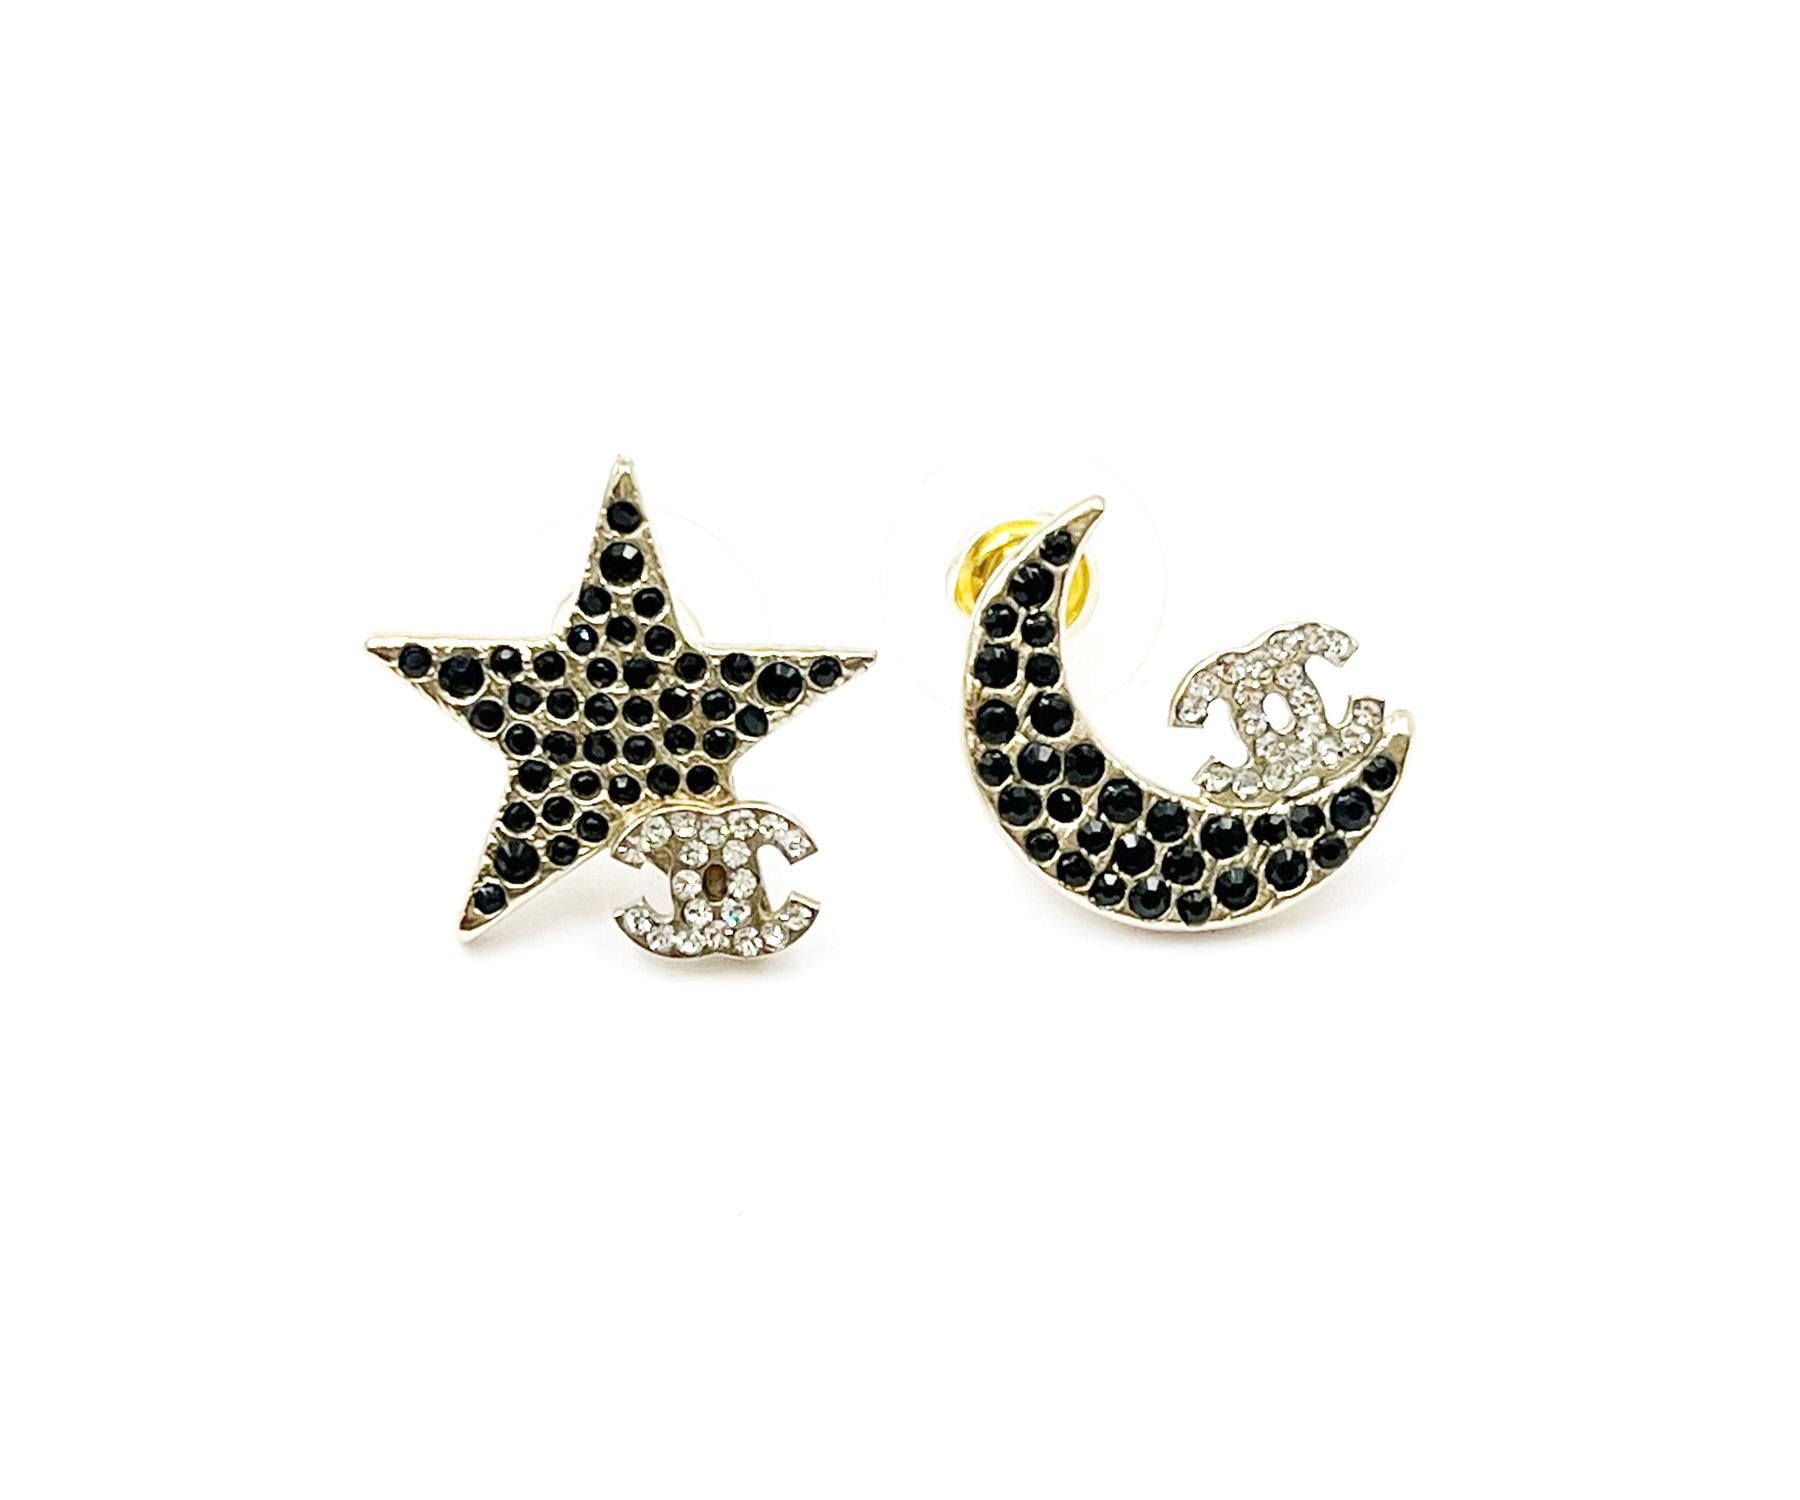 Chanel Super Rare Star Moon Black Crystal CC Small Piercing Earrings

*Marked 08
*Made in Italy
*Comes with the original box

-It is approximately 0.7